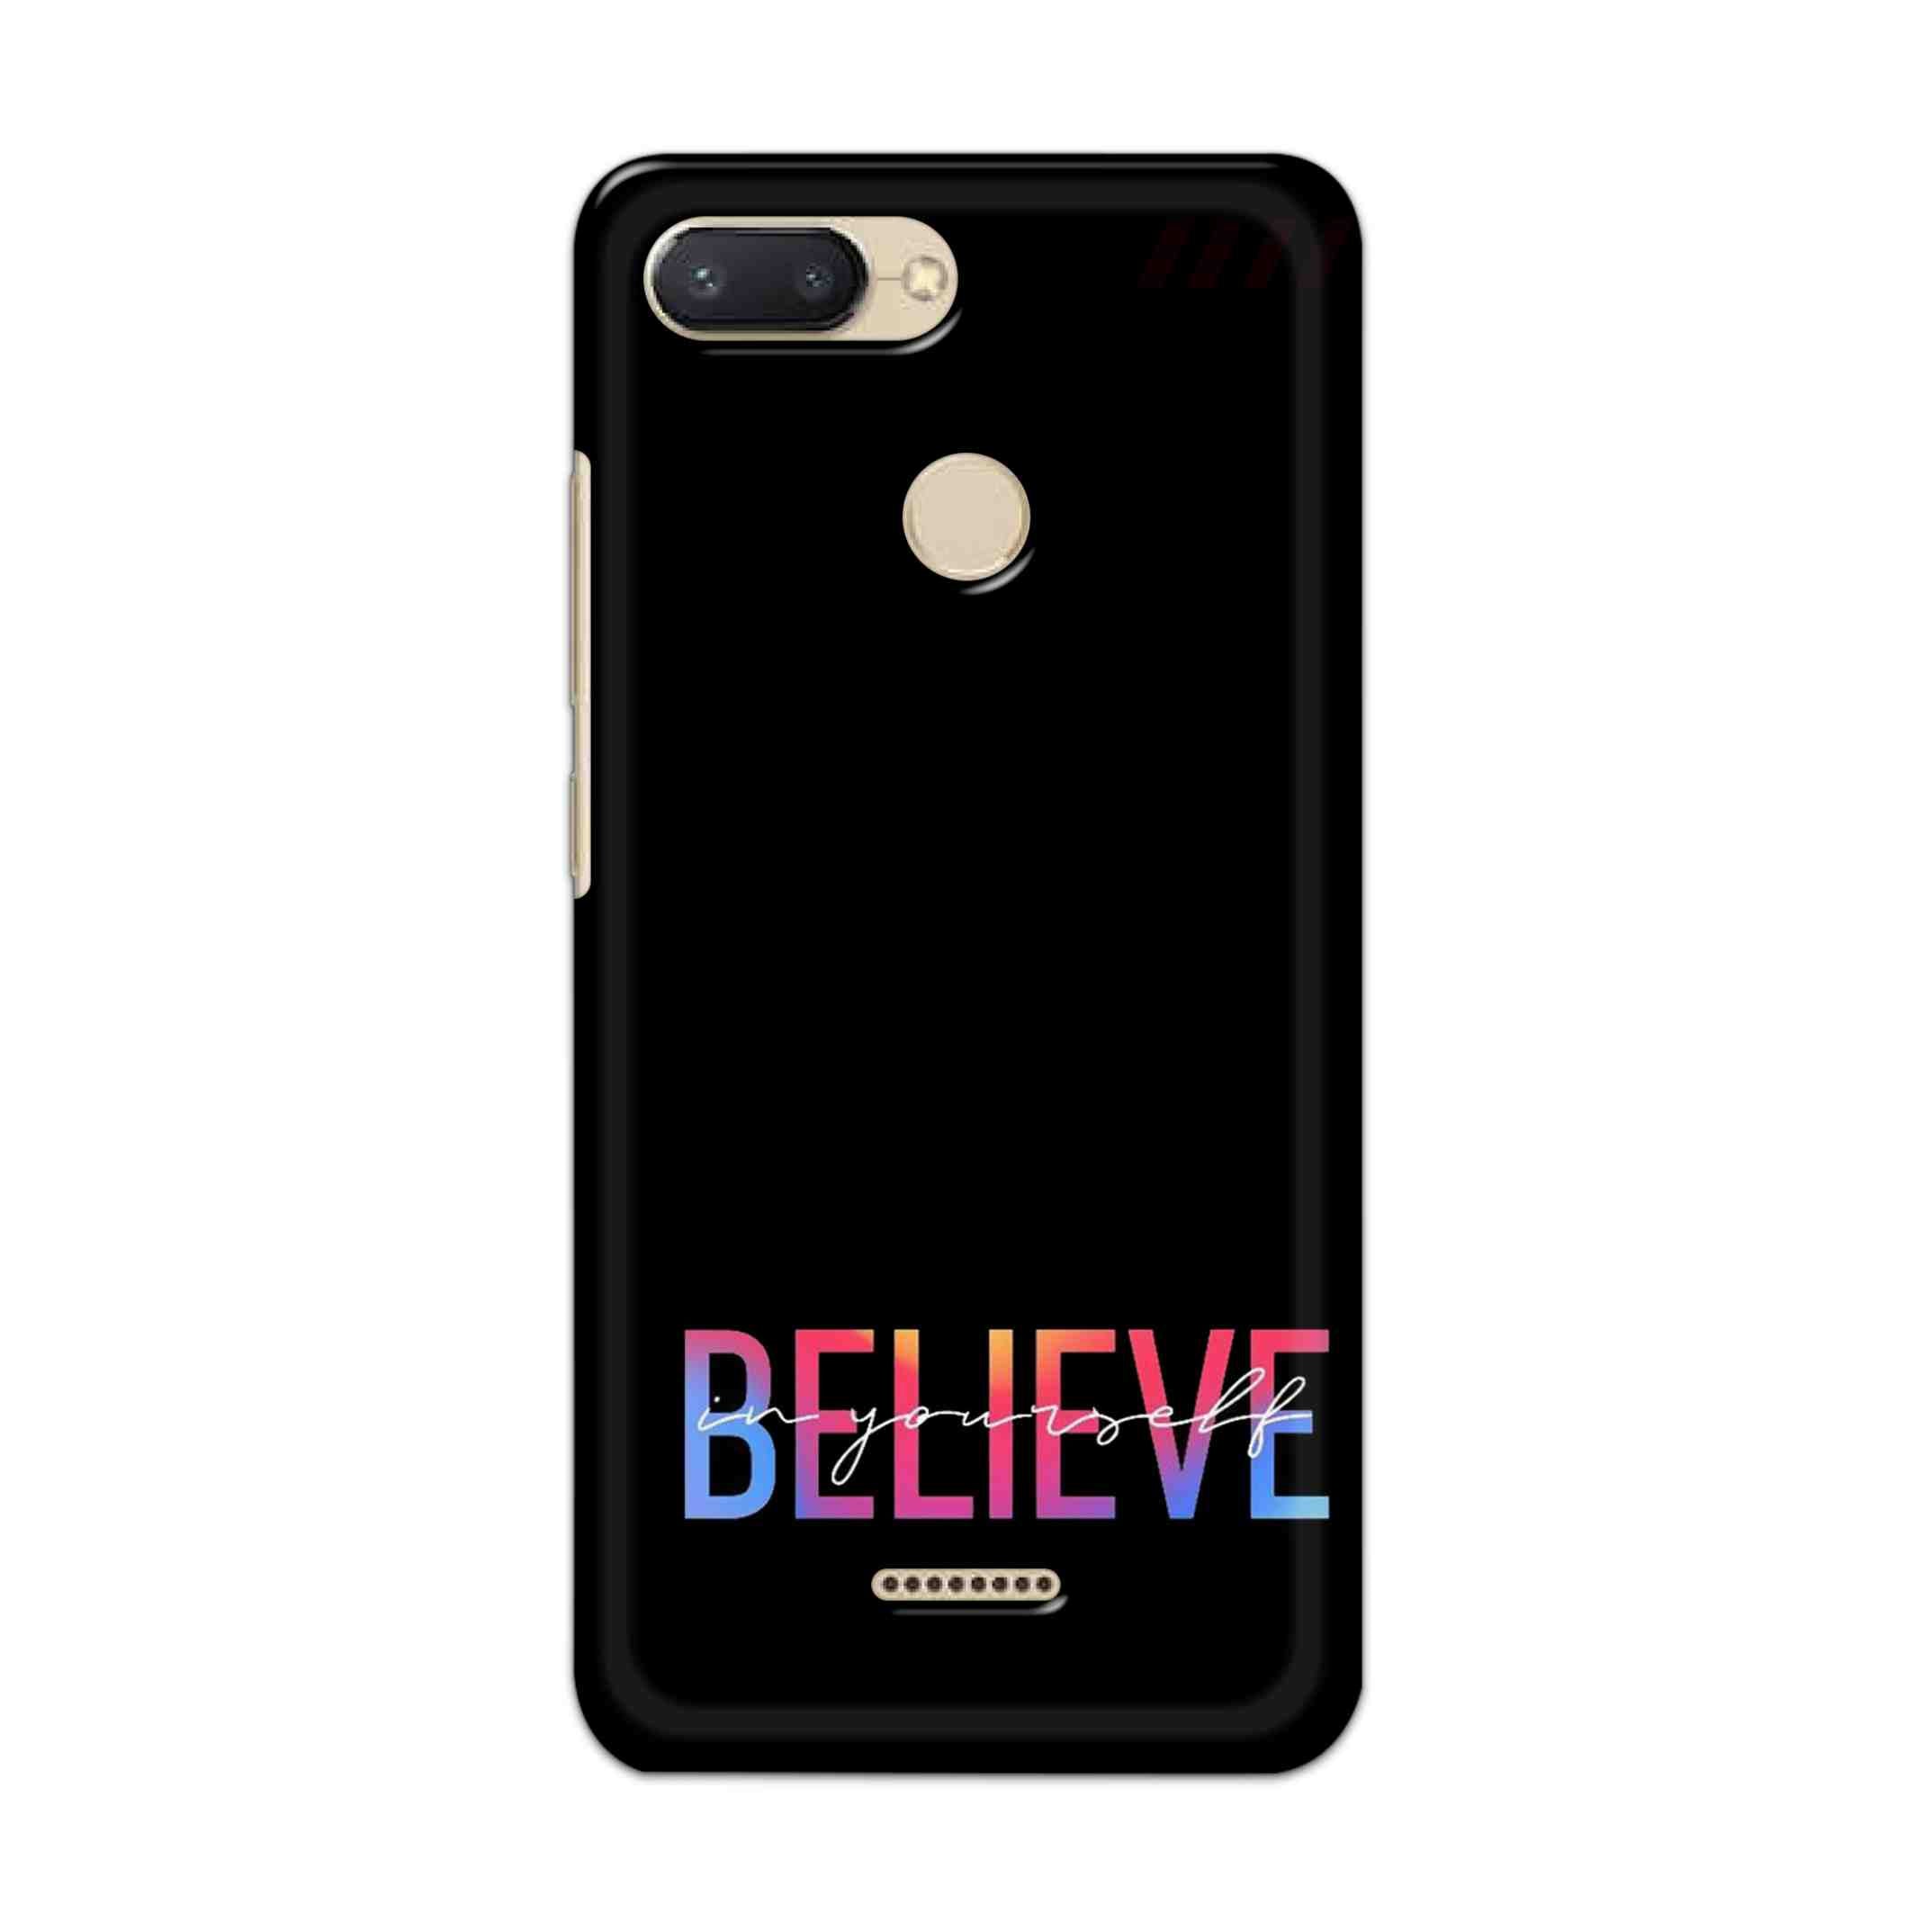 Buy Believe Hard Back Mobile Phone Case/Cover For Xiaomi Redmi 6 Online